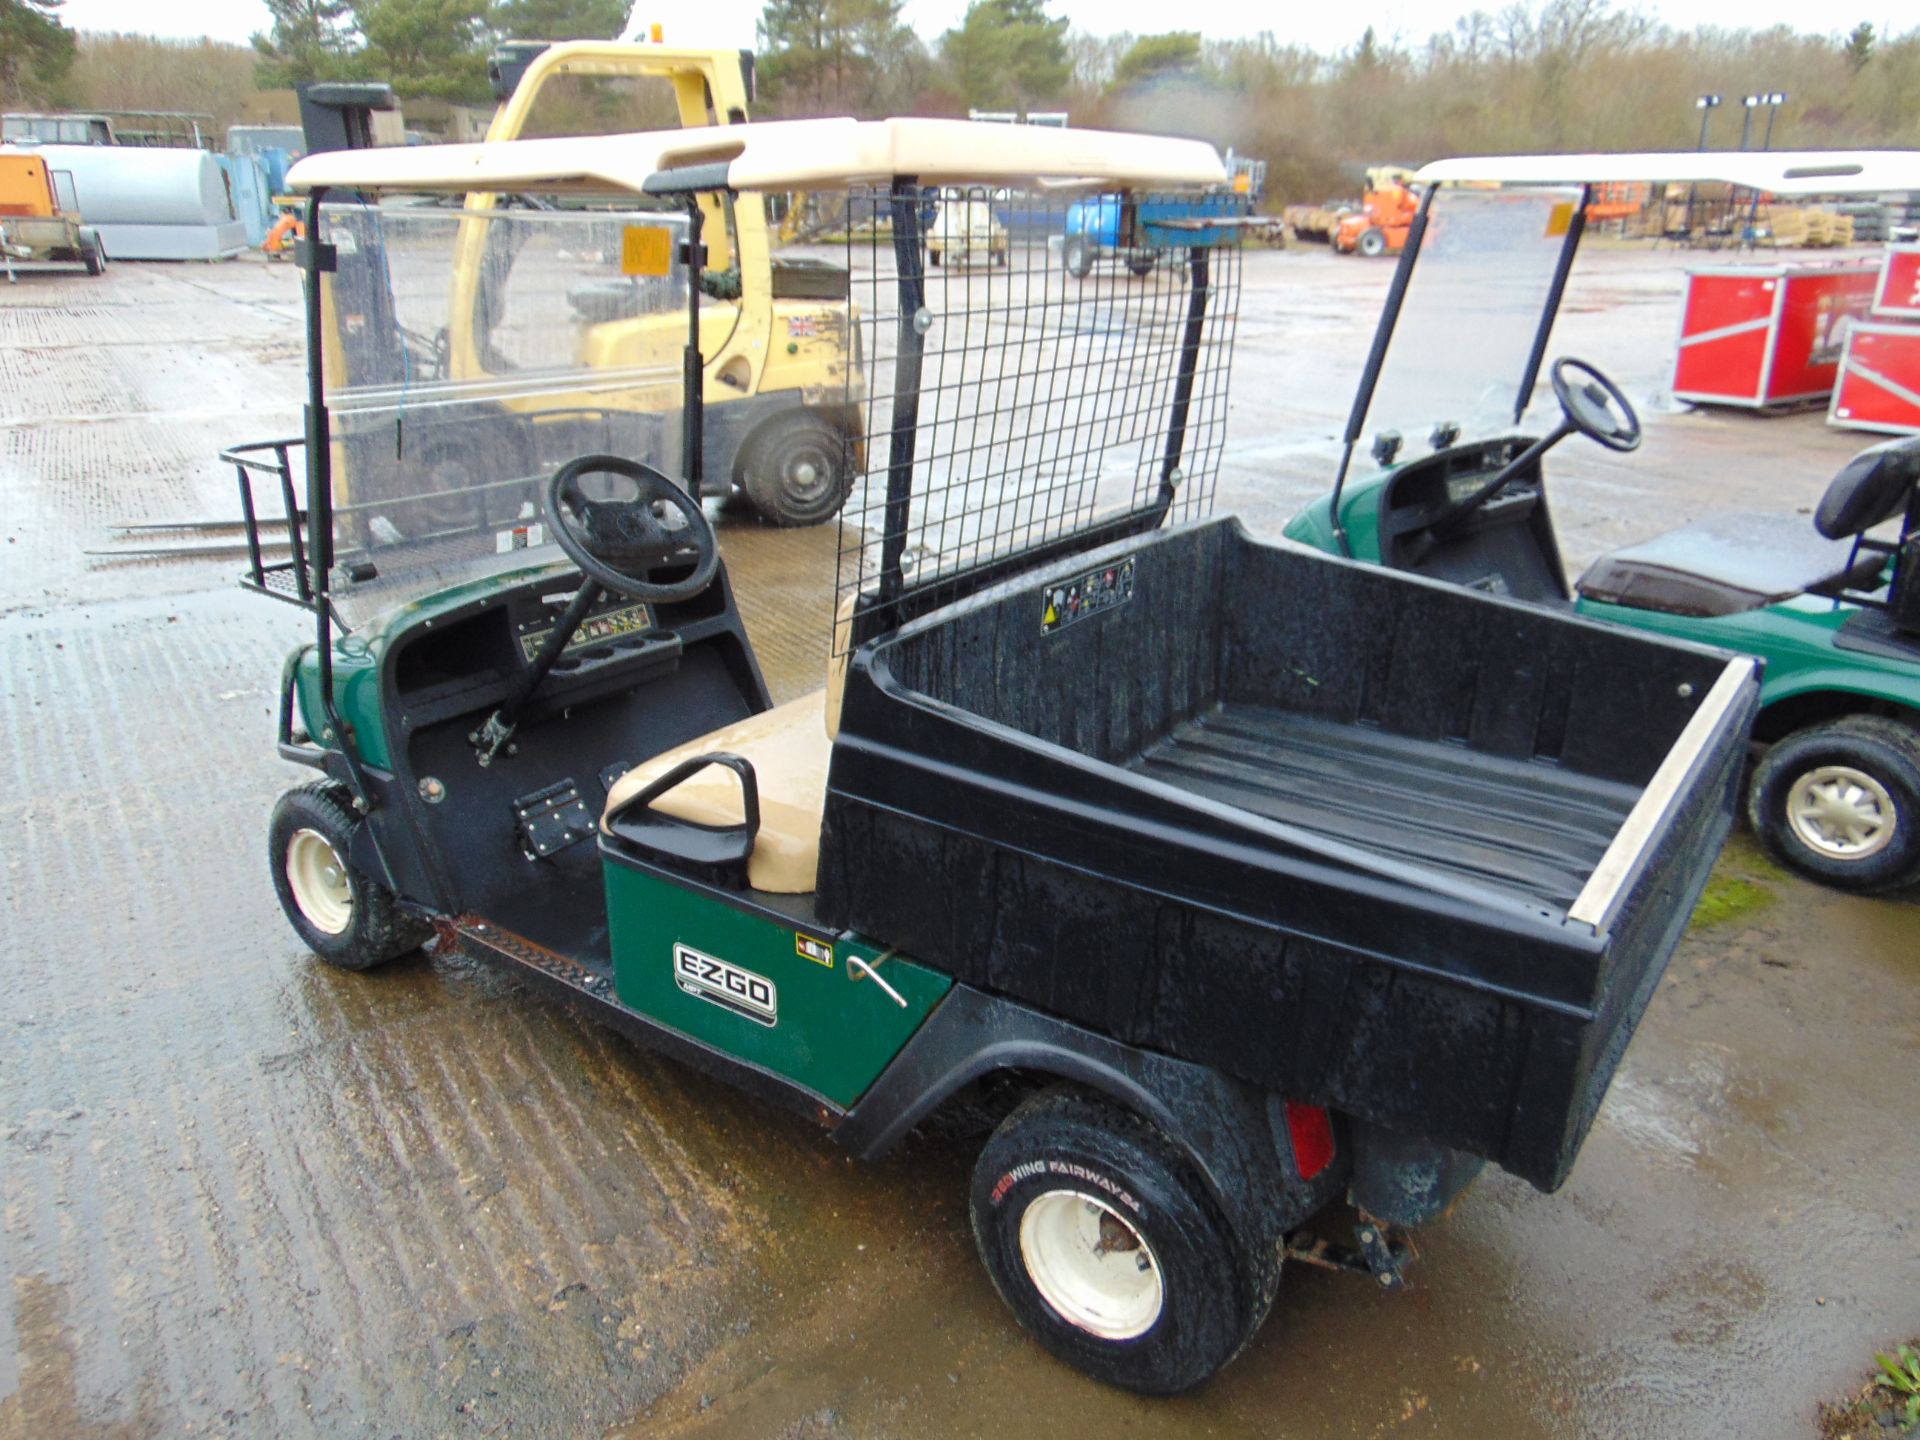 EZ-GO MPT Turf Master Electric Grounds Cart - Image 4 of 11